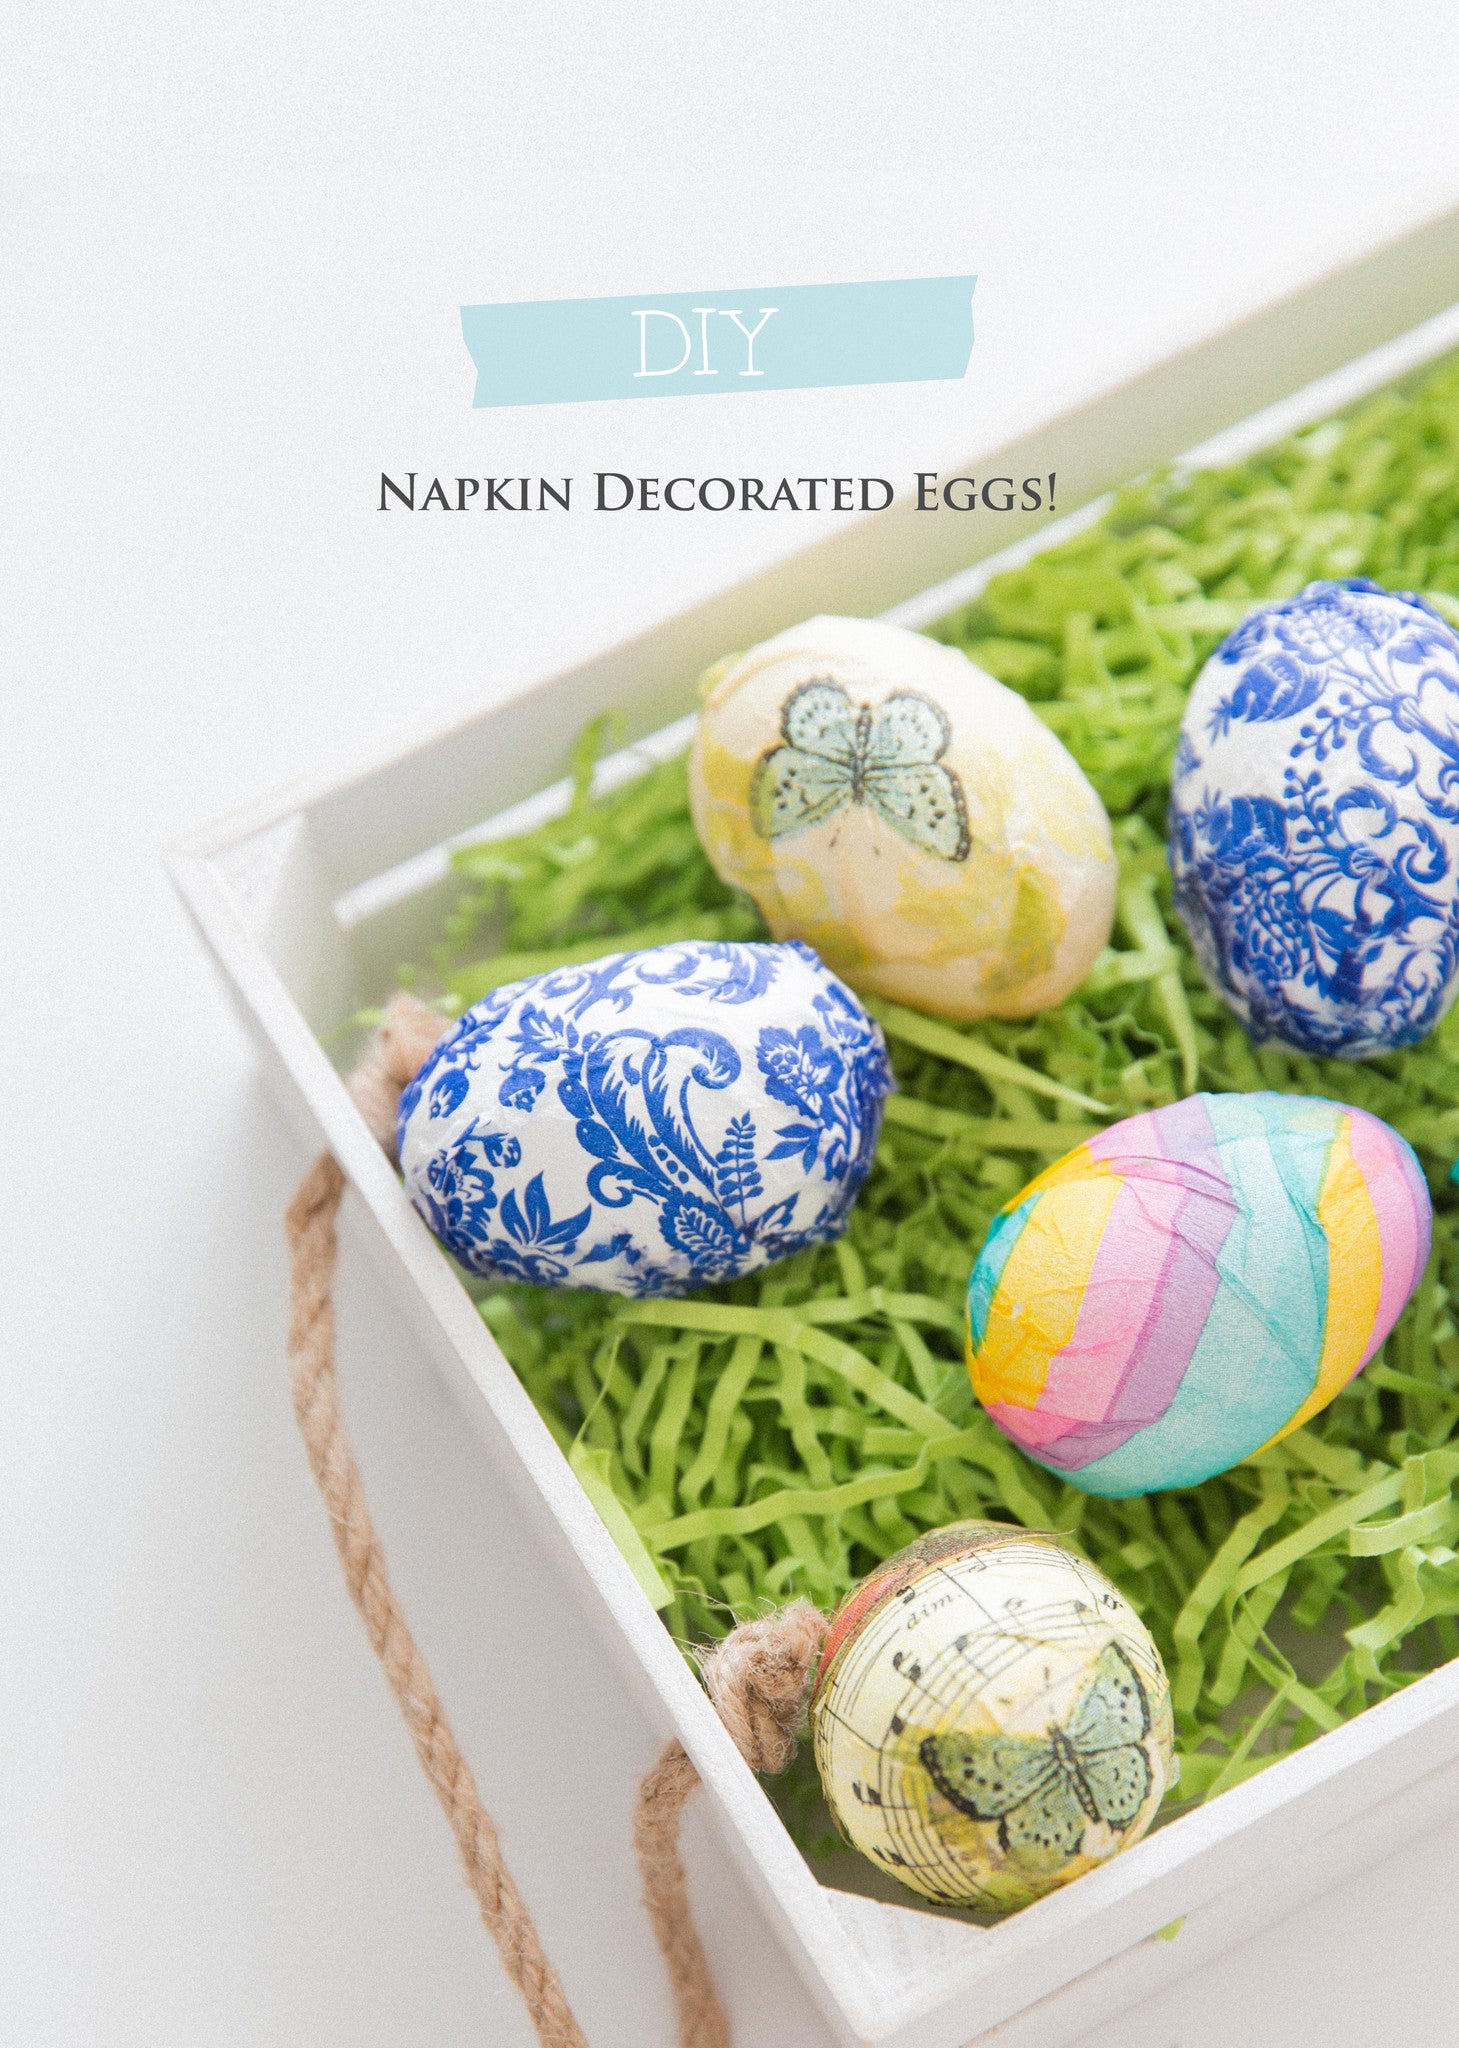 DIY Napkin Decorated Easter Eggs!